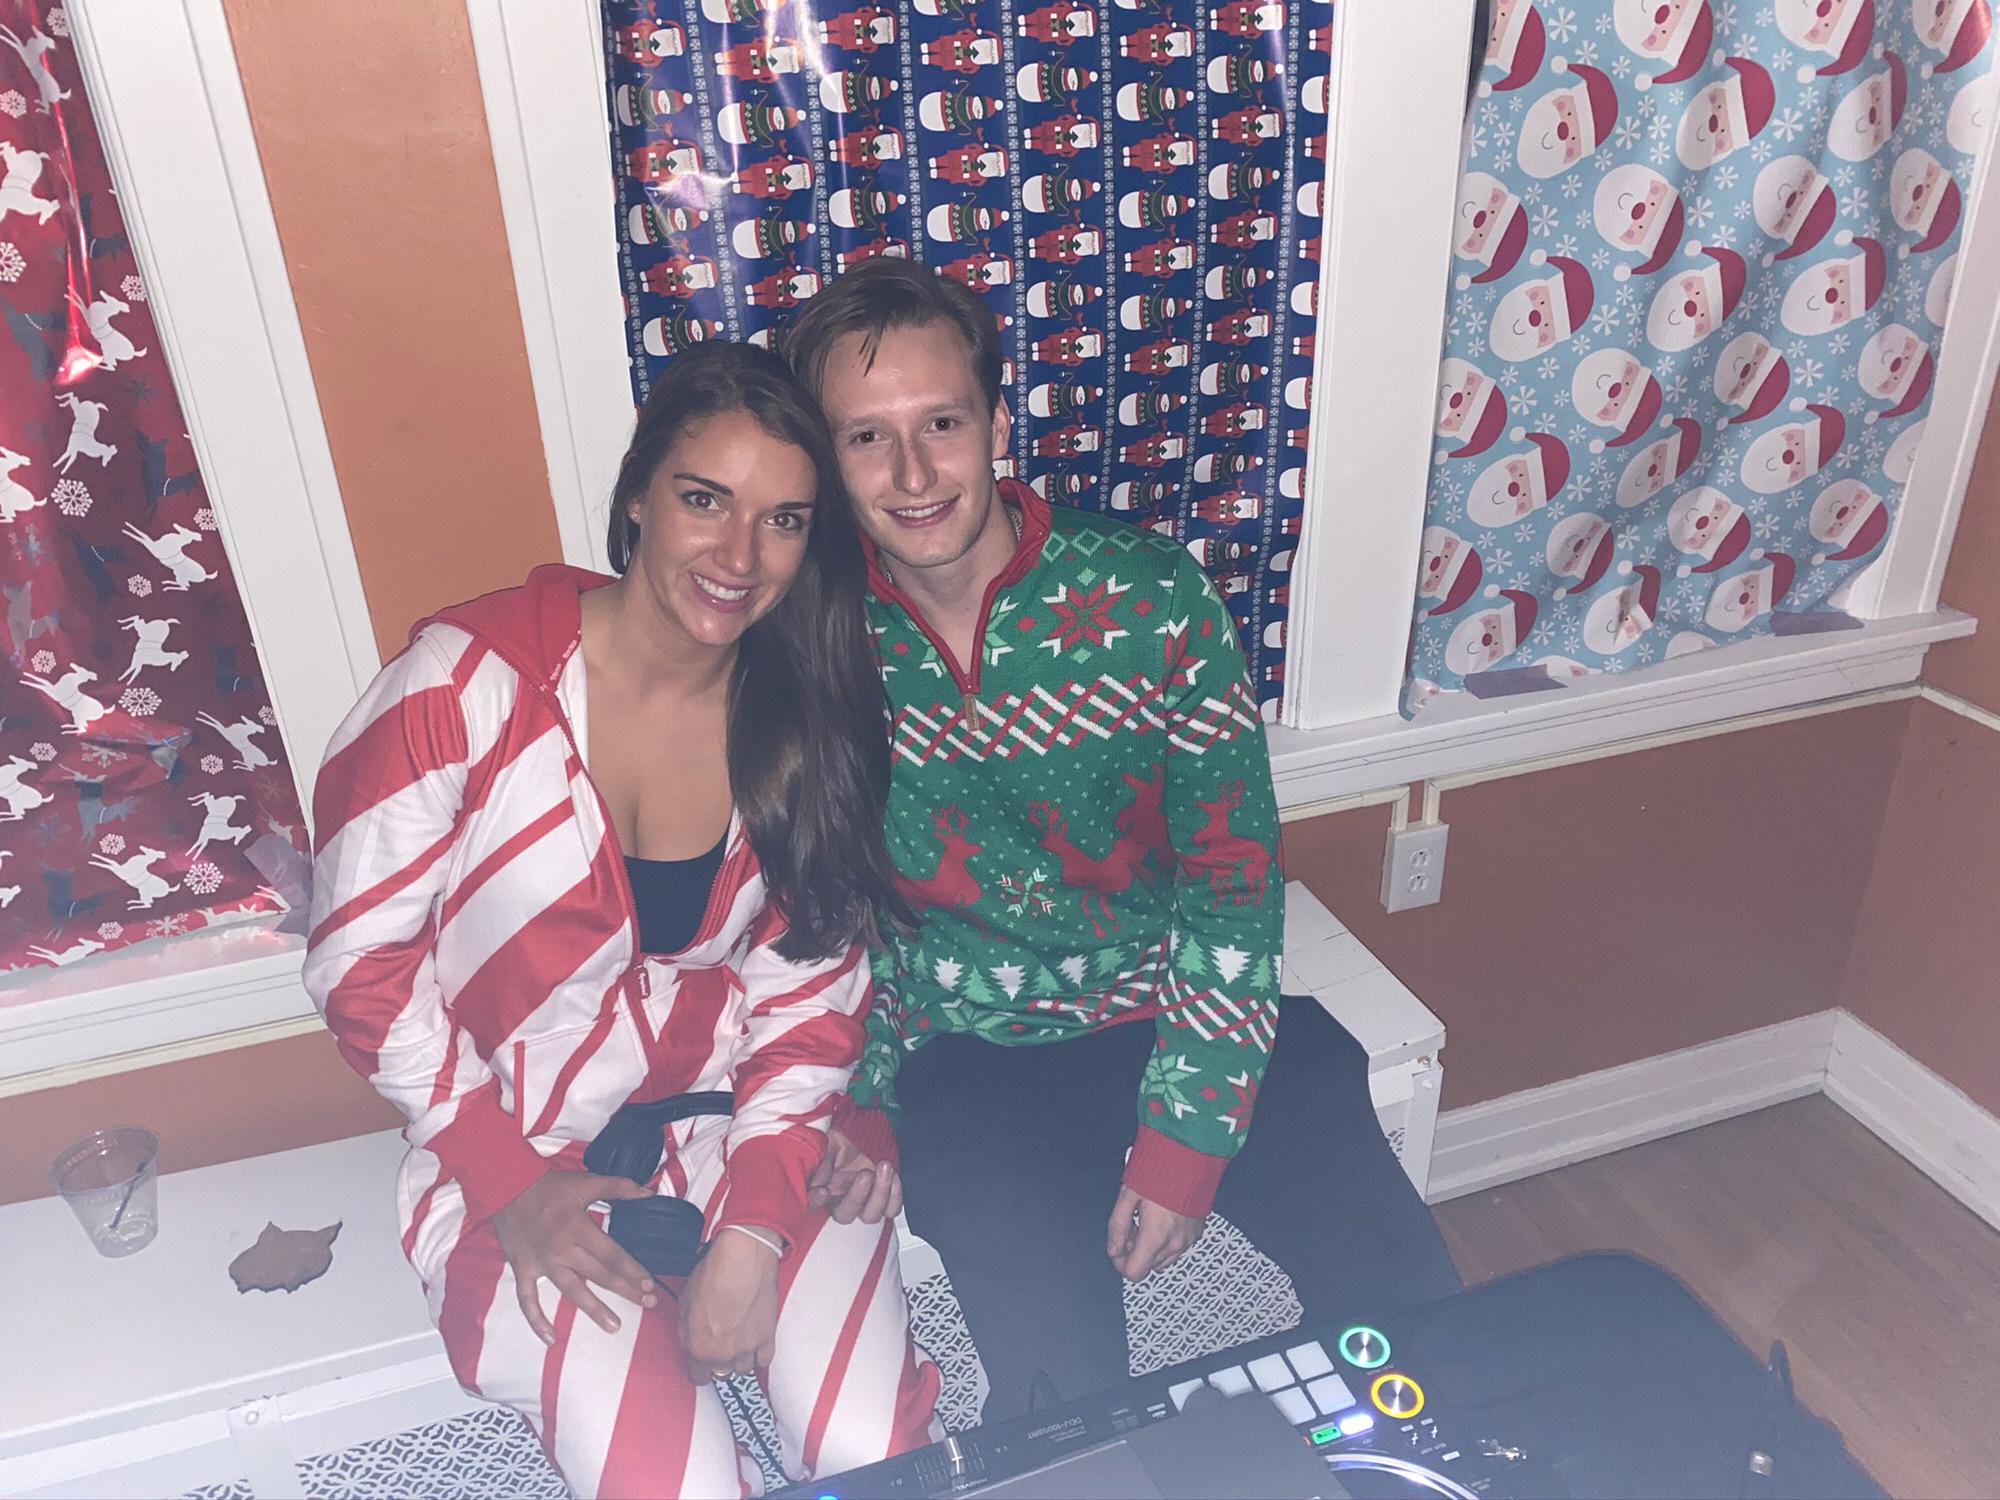 Our friend's Christmas party 2019 (Reilly DJed the party)